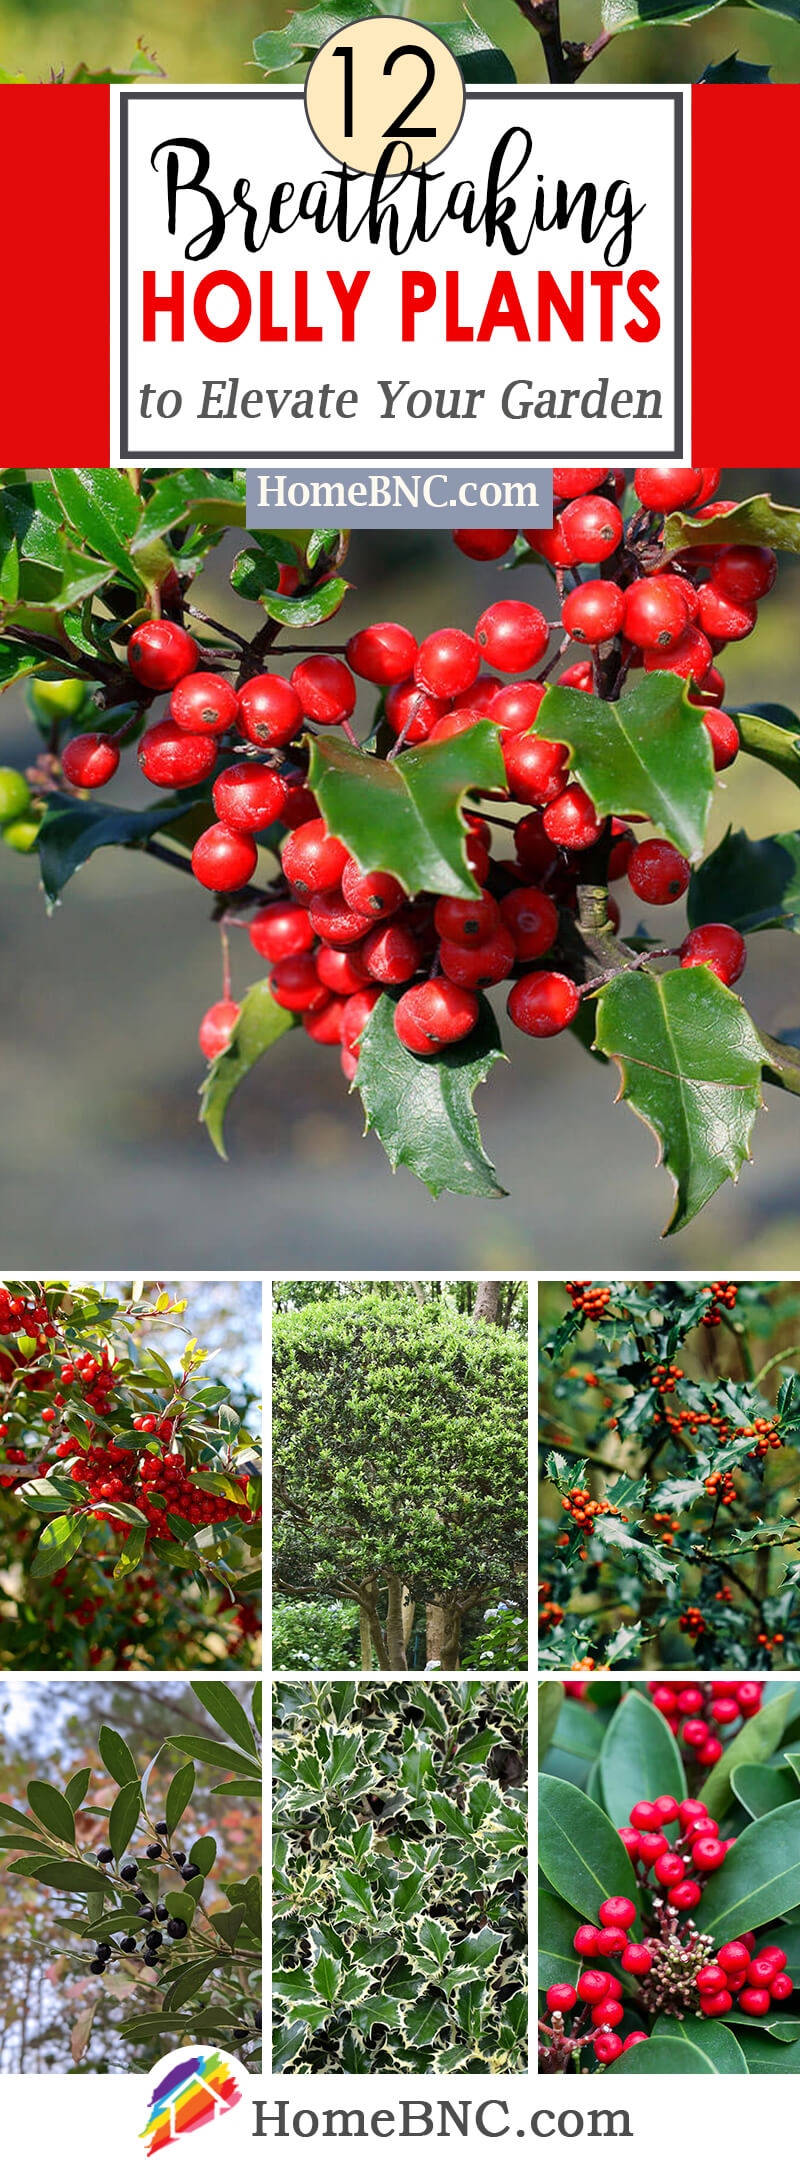 Types of Holly Plants